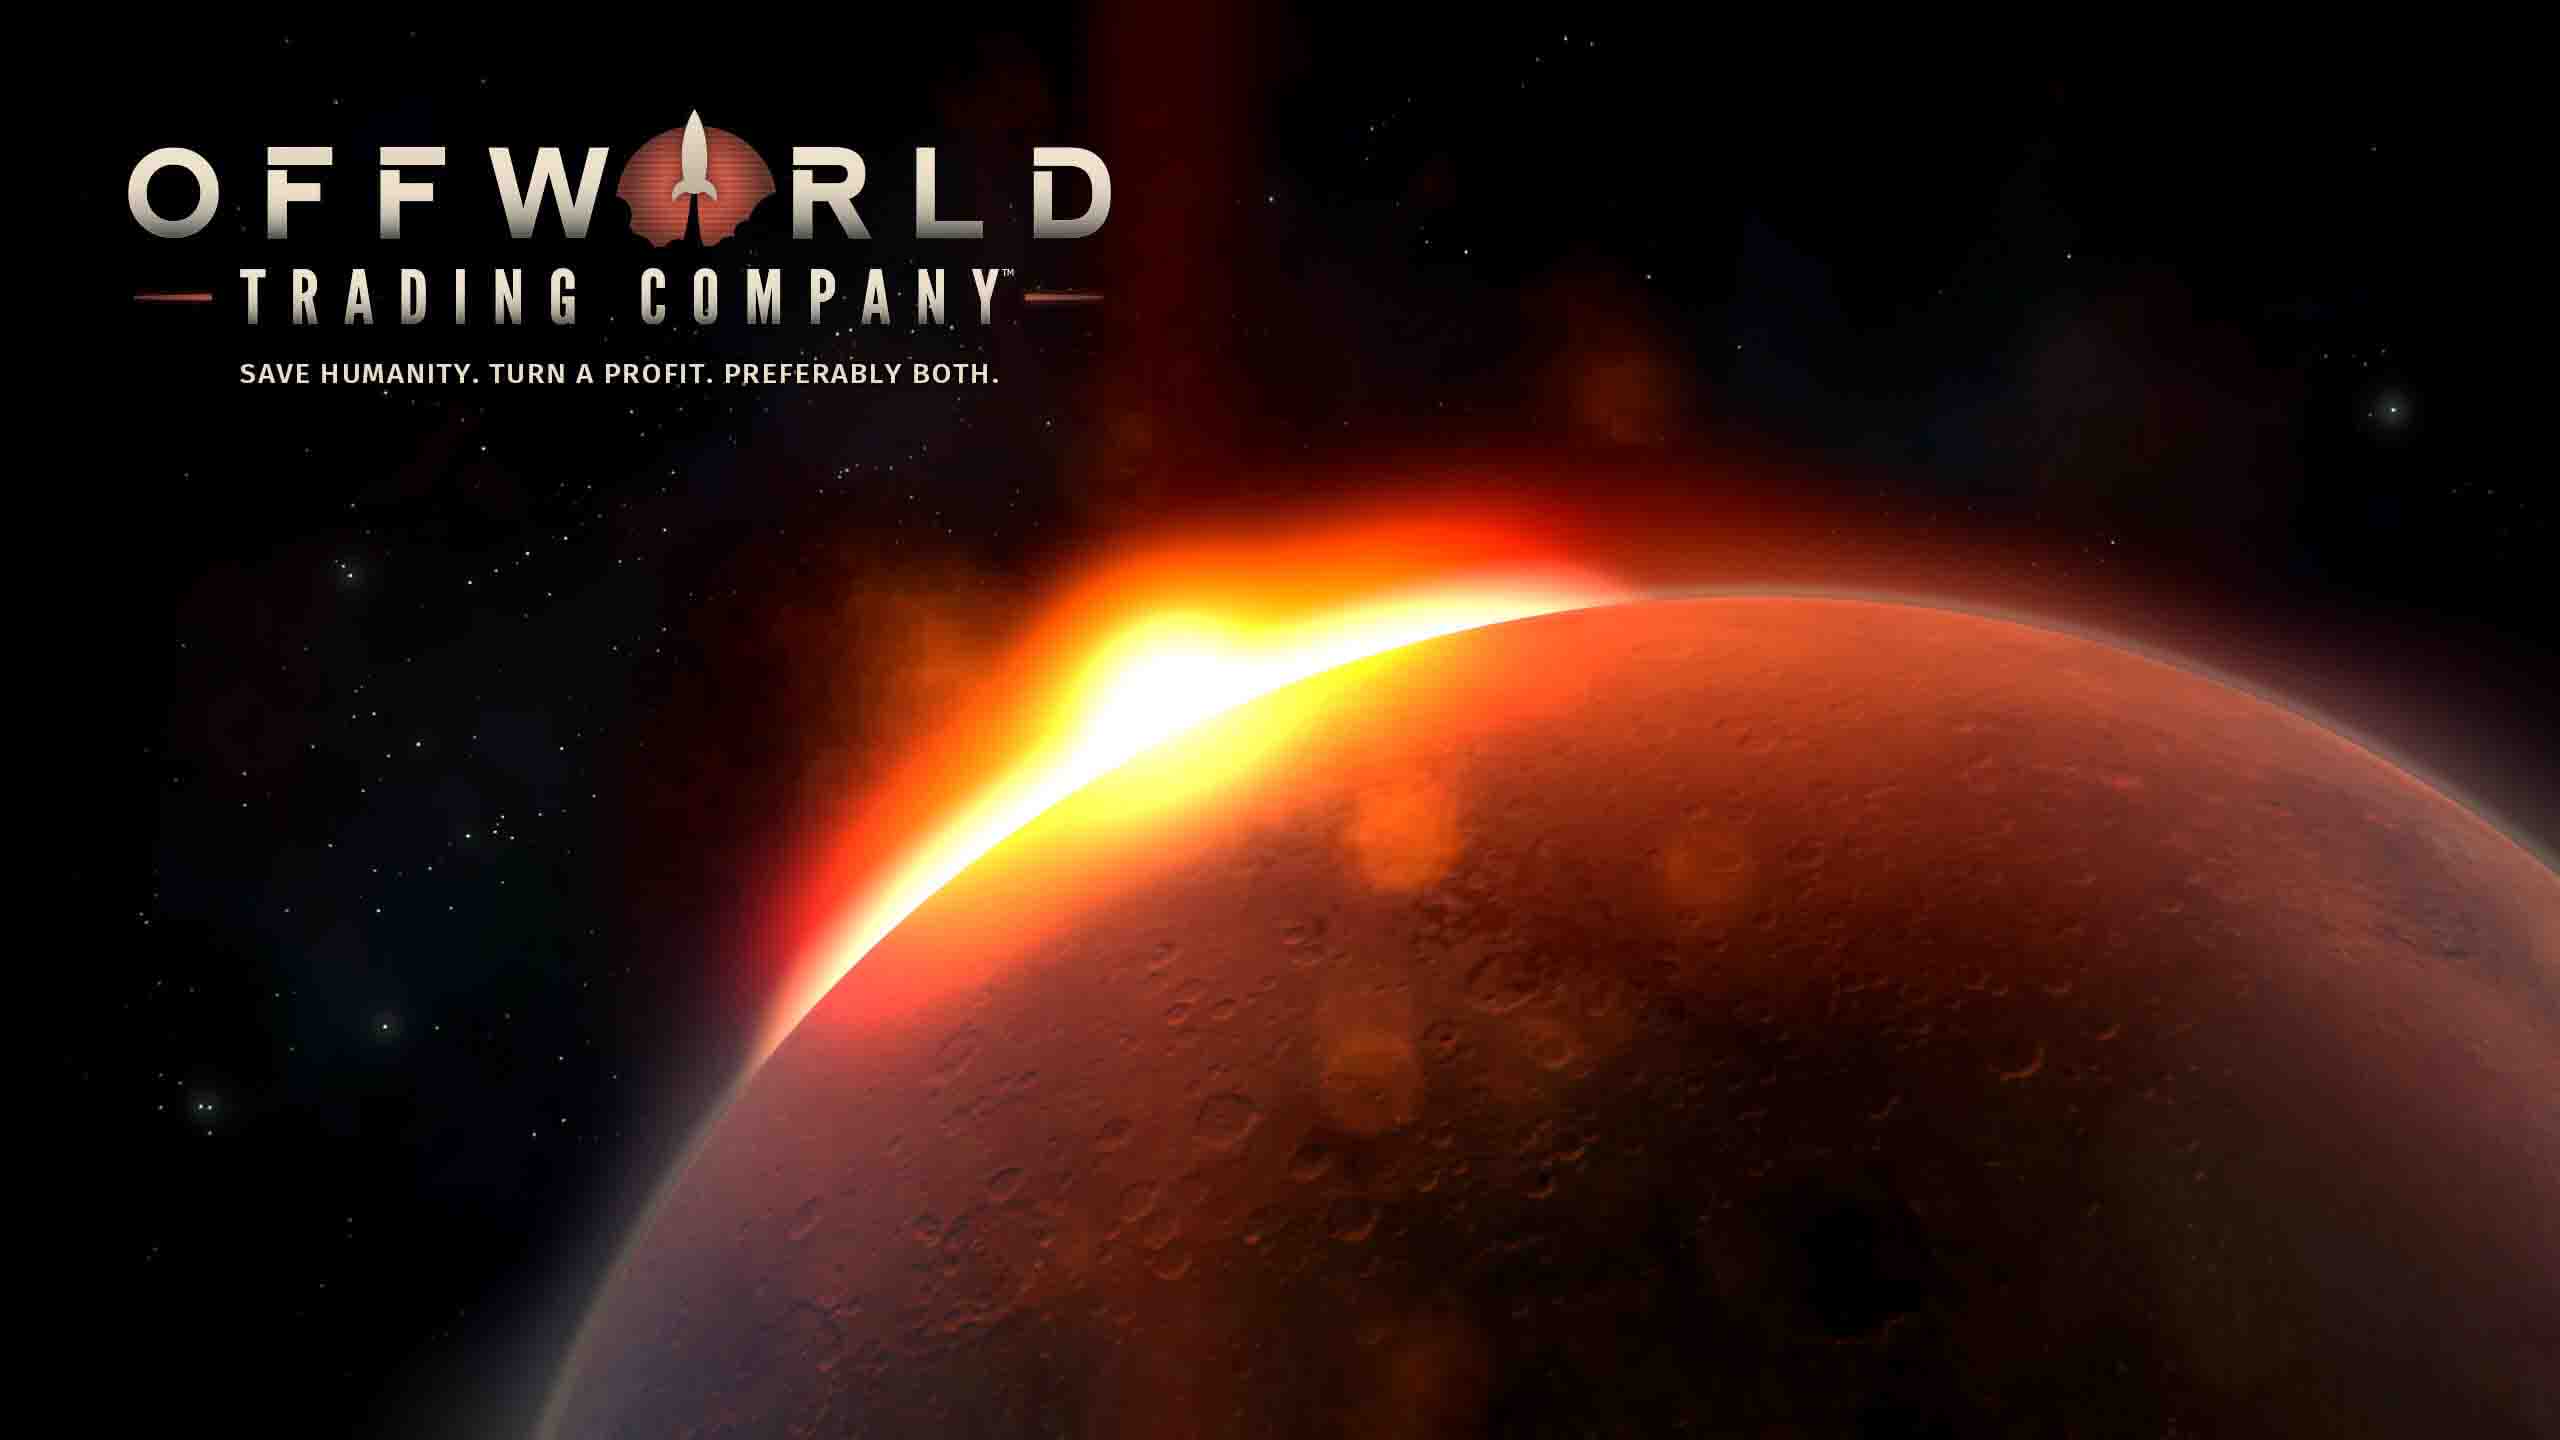 Offworld Trading Company System Requirements for PC Games minimum, recommended specifications for Windows, CPU, OS, Processor, RAM Memory, Storage, and GPU.